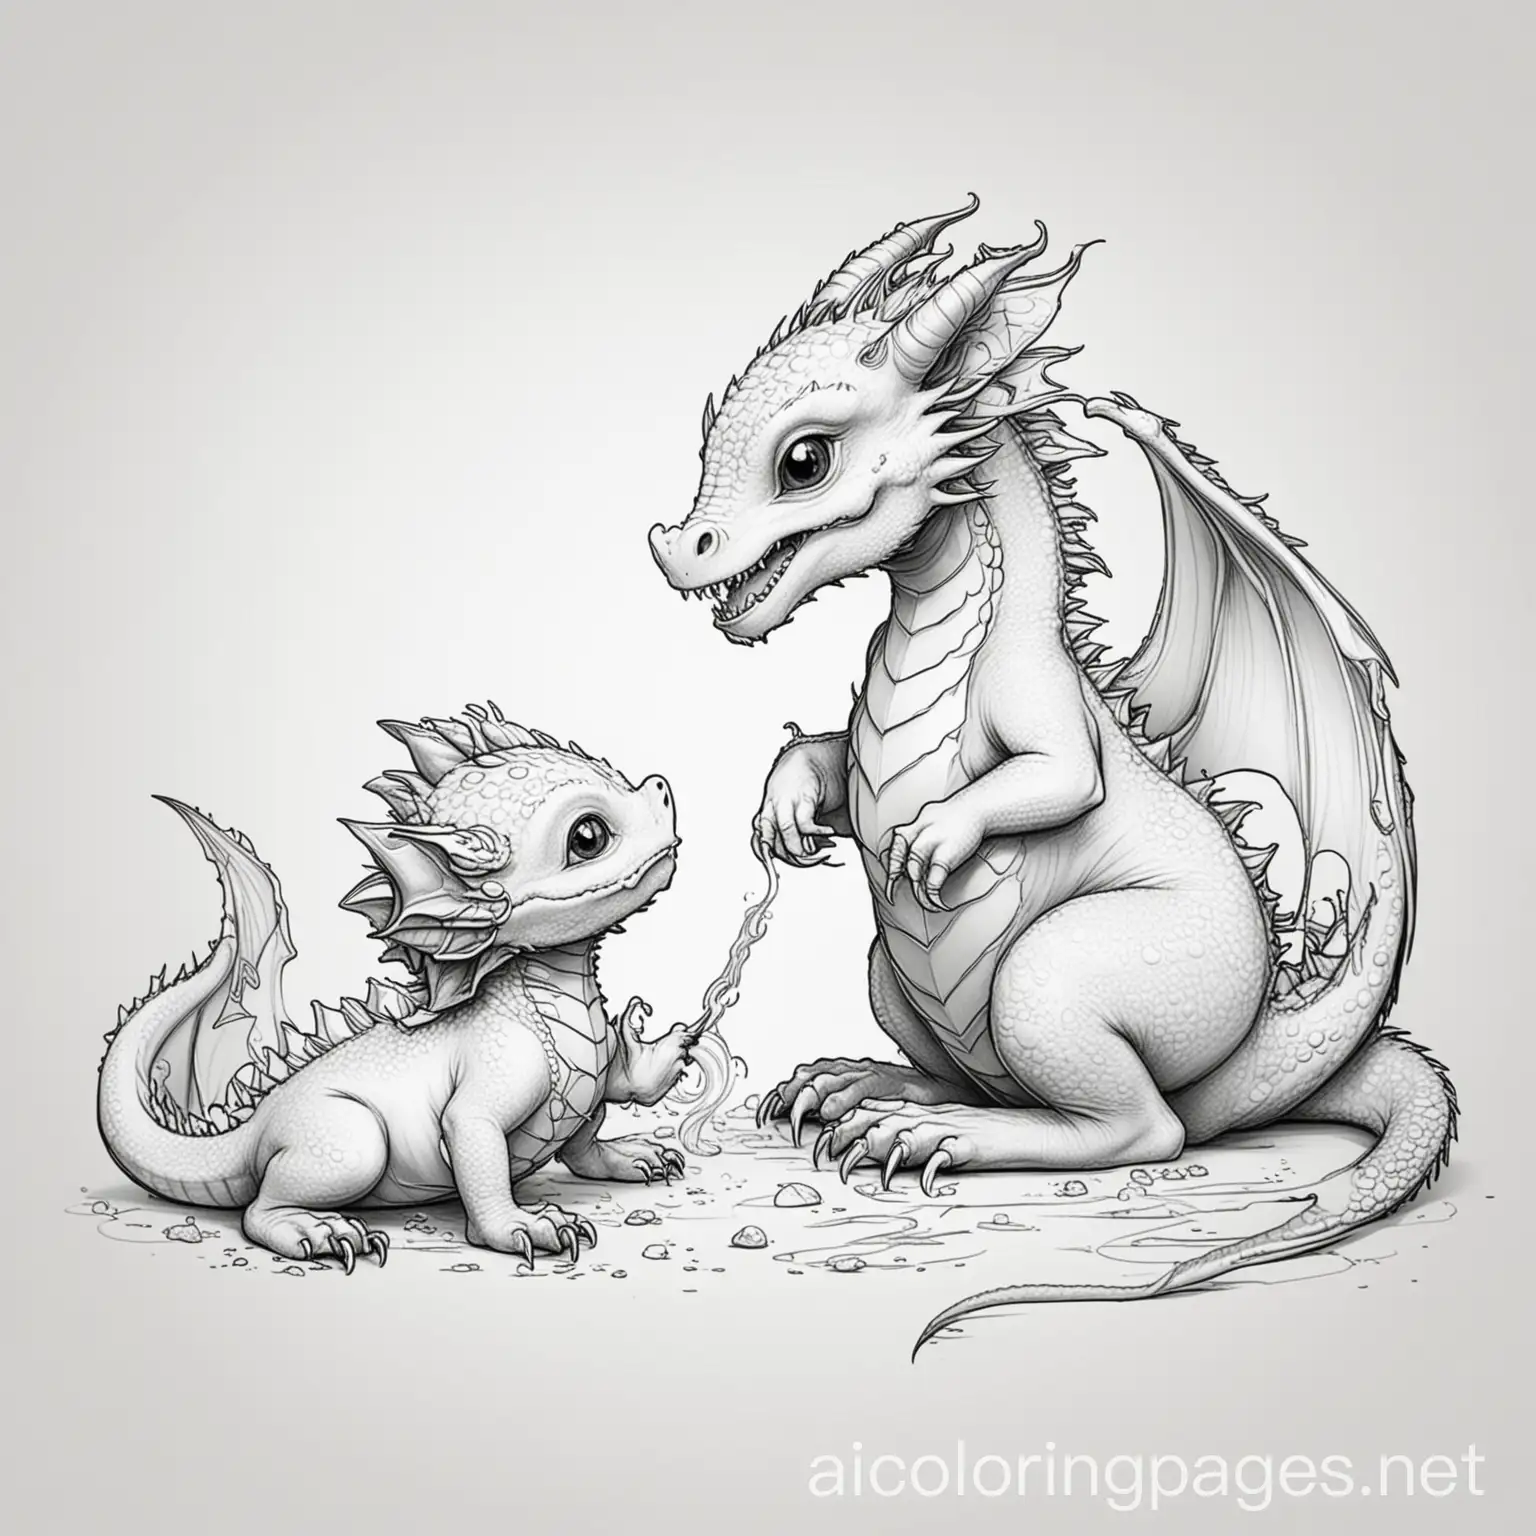 babydragon playing with child, Coloring Page, black and white, line art, white background, Simplicity, Ample White Space. The background of the coloring page is plain white to make it easy for young children to color within the lines. The outlines of all the subjects are easy to distinguish, making it simple for kids to color without too much difficulty